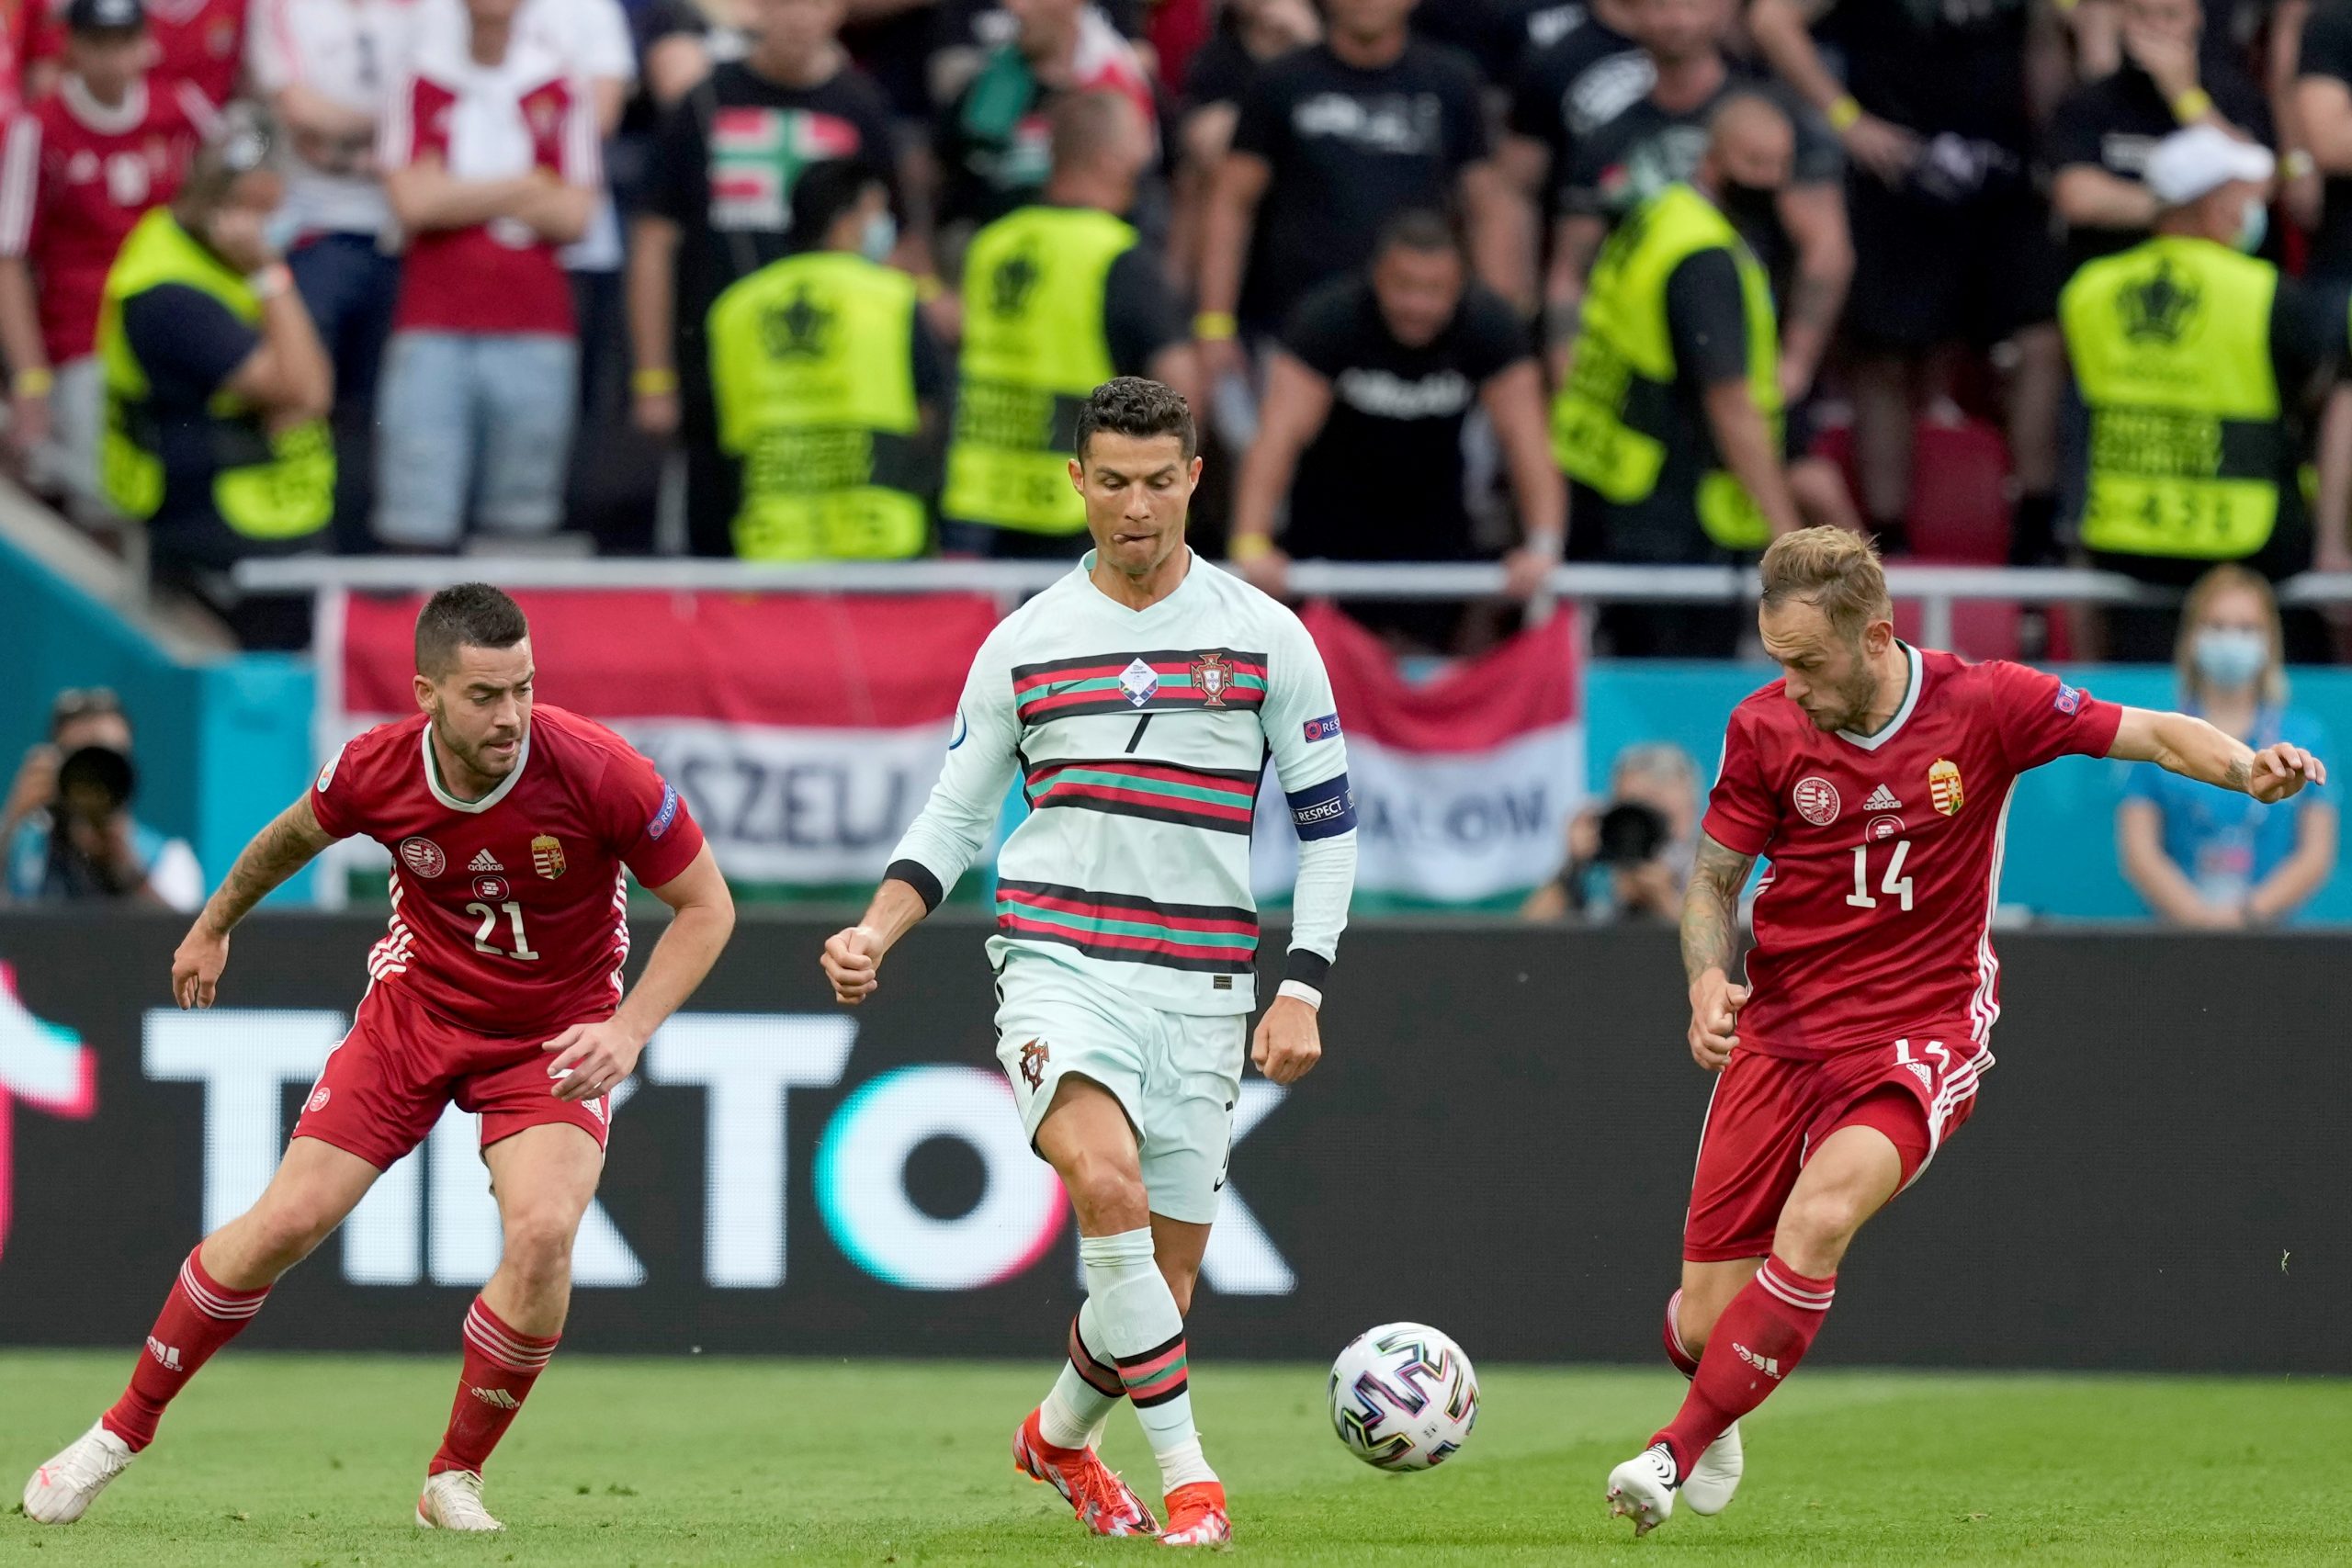 epa09273887 Cristiano Ronaldo (C) of Portugal in action against Endre Botka (L) and Gergo Lovrencsics of Hungary during the UEFA EURO 2020 group F preliminary round soccer match between Hungary and Portugal in Budapest, Hungary, 15 June 2021.  EPA/HUGO DELGADO